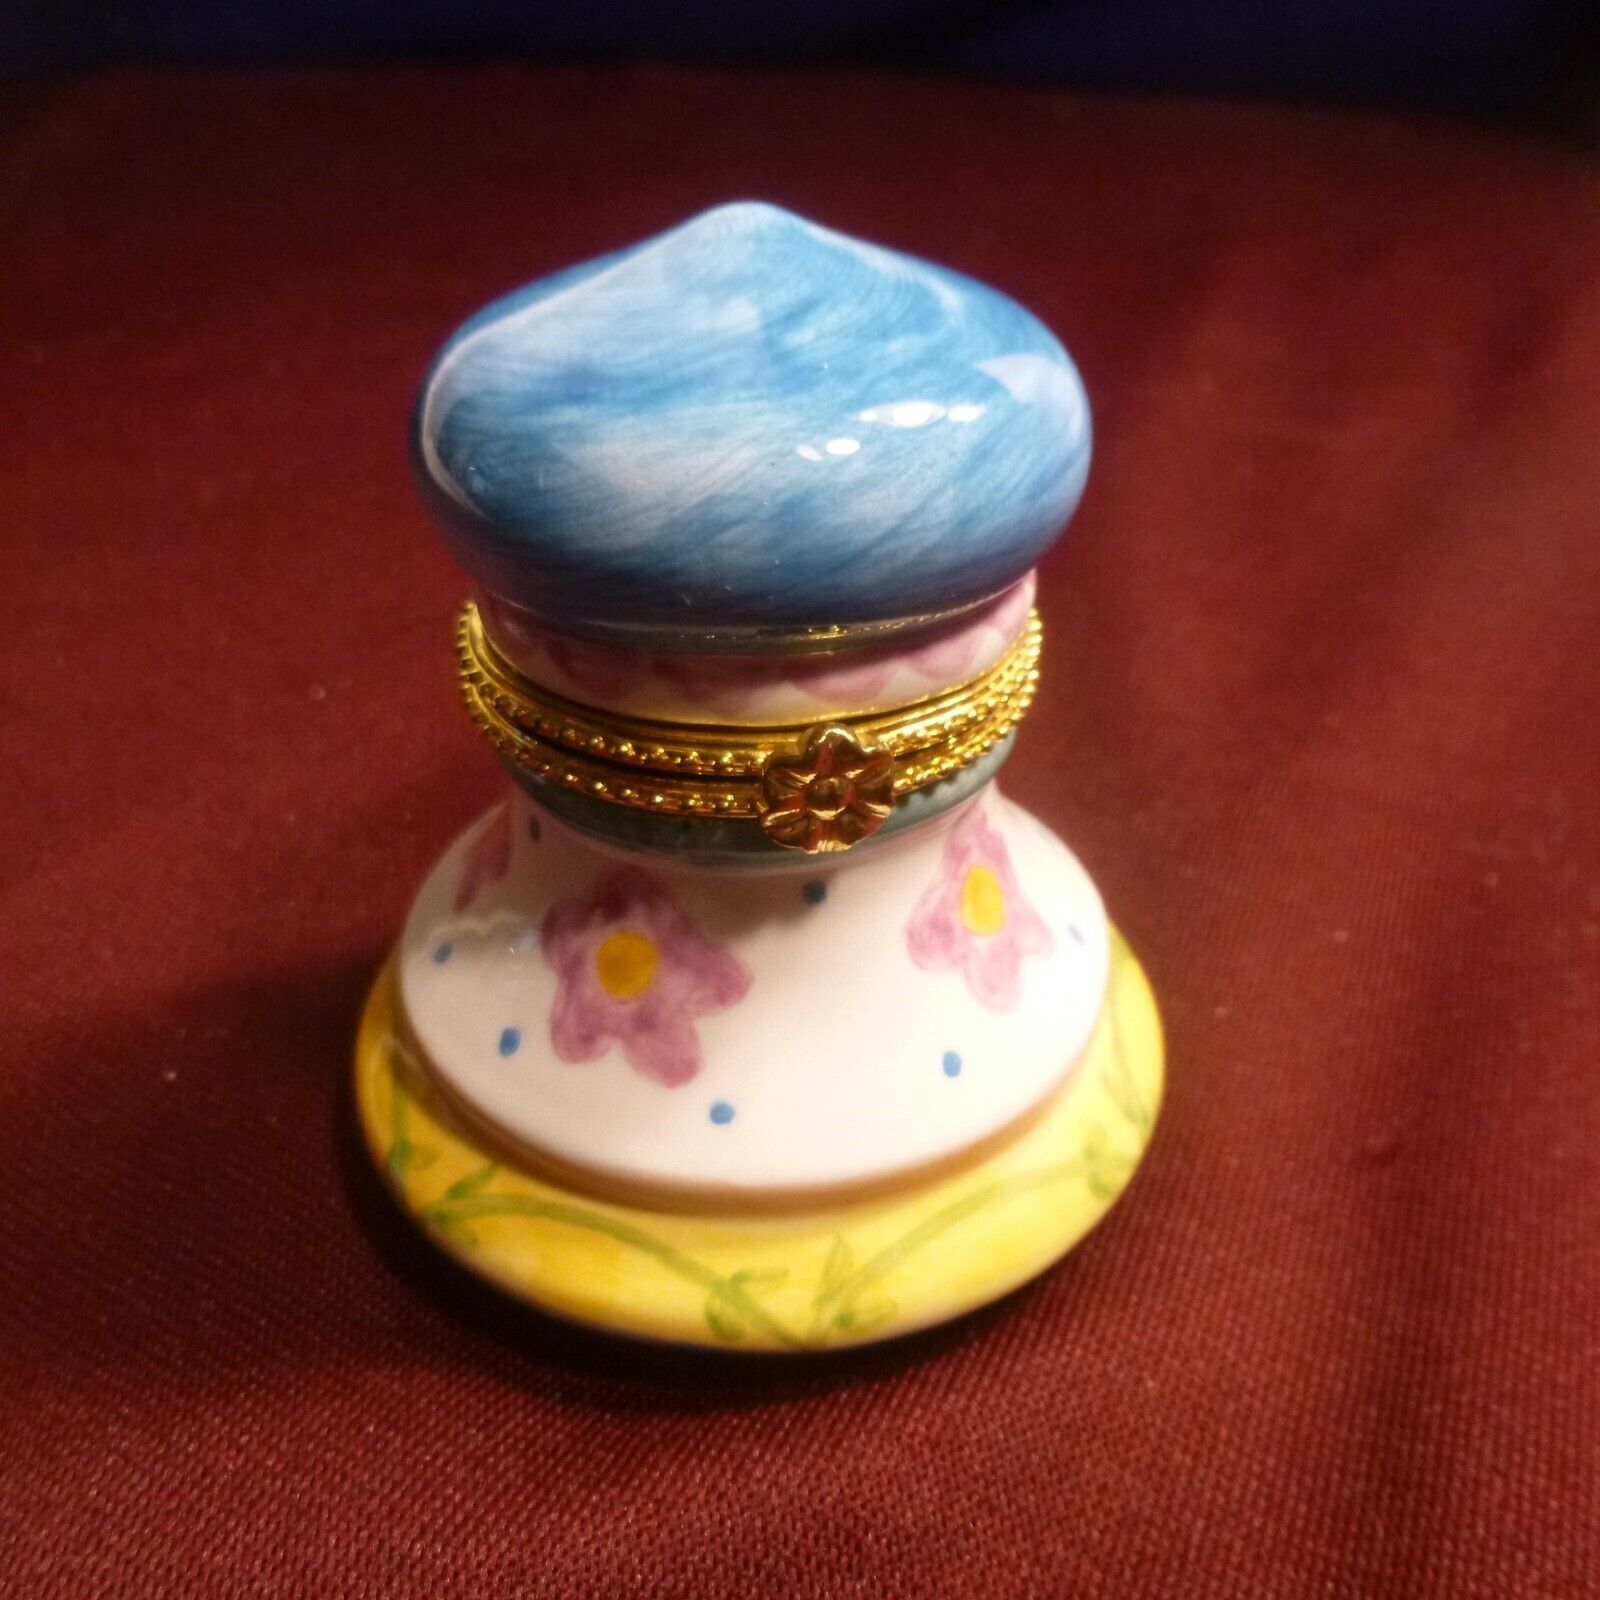 TRINKET BOX - RARE, Domed top, colorful - porcelain, hinged - MINT